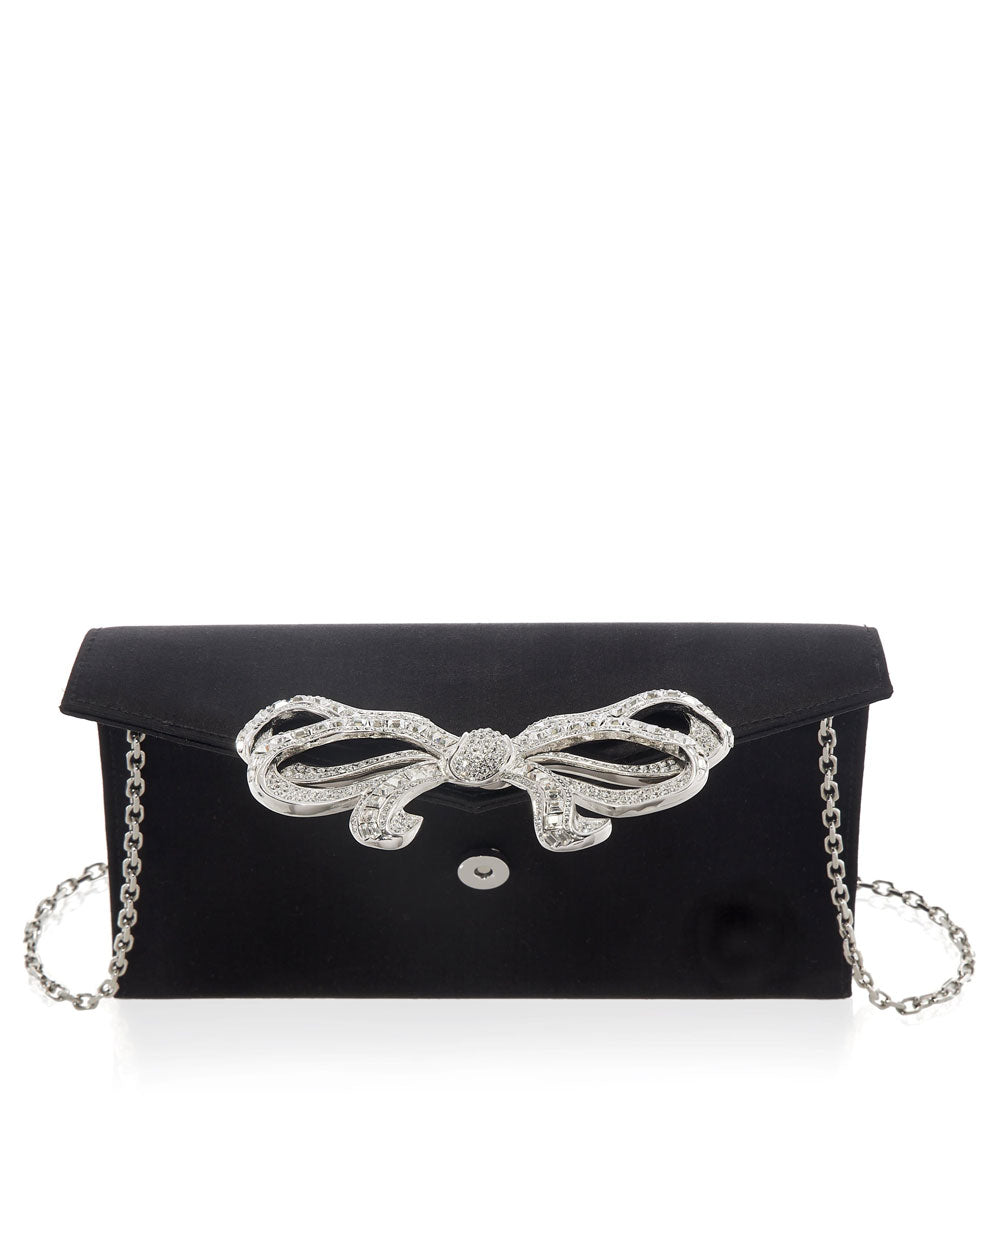 Judith Leiber Couture Crystal Bow Clutch Bag